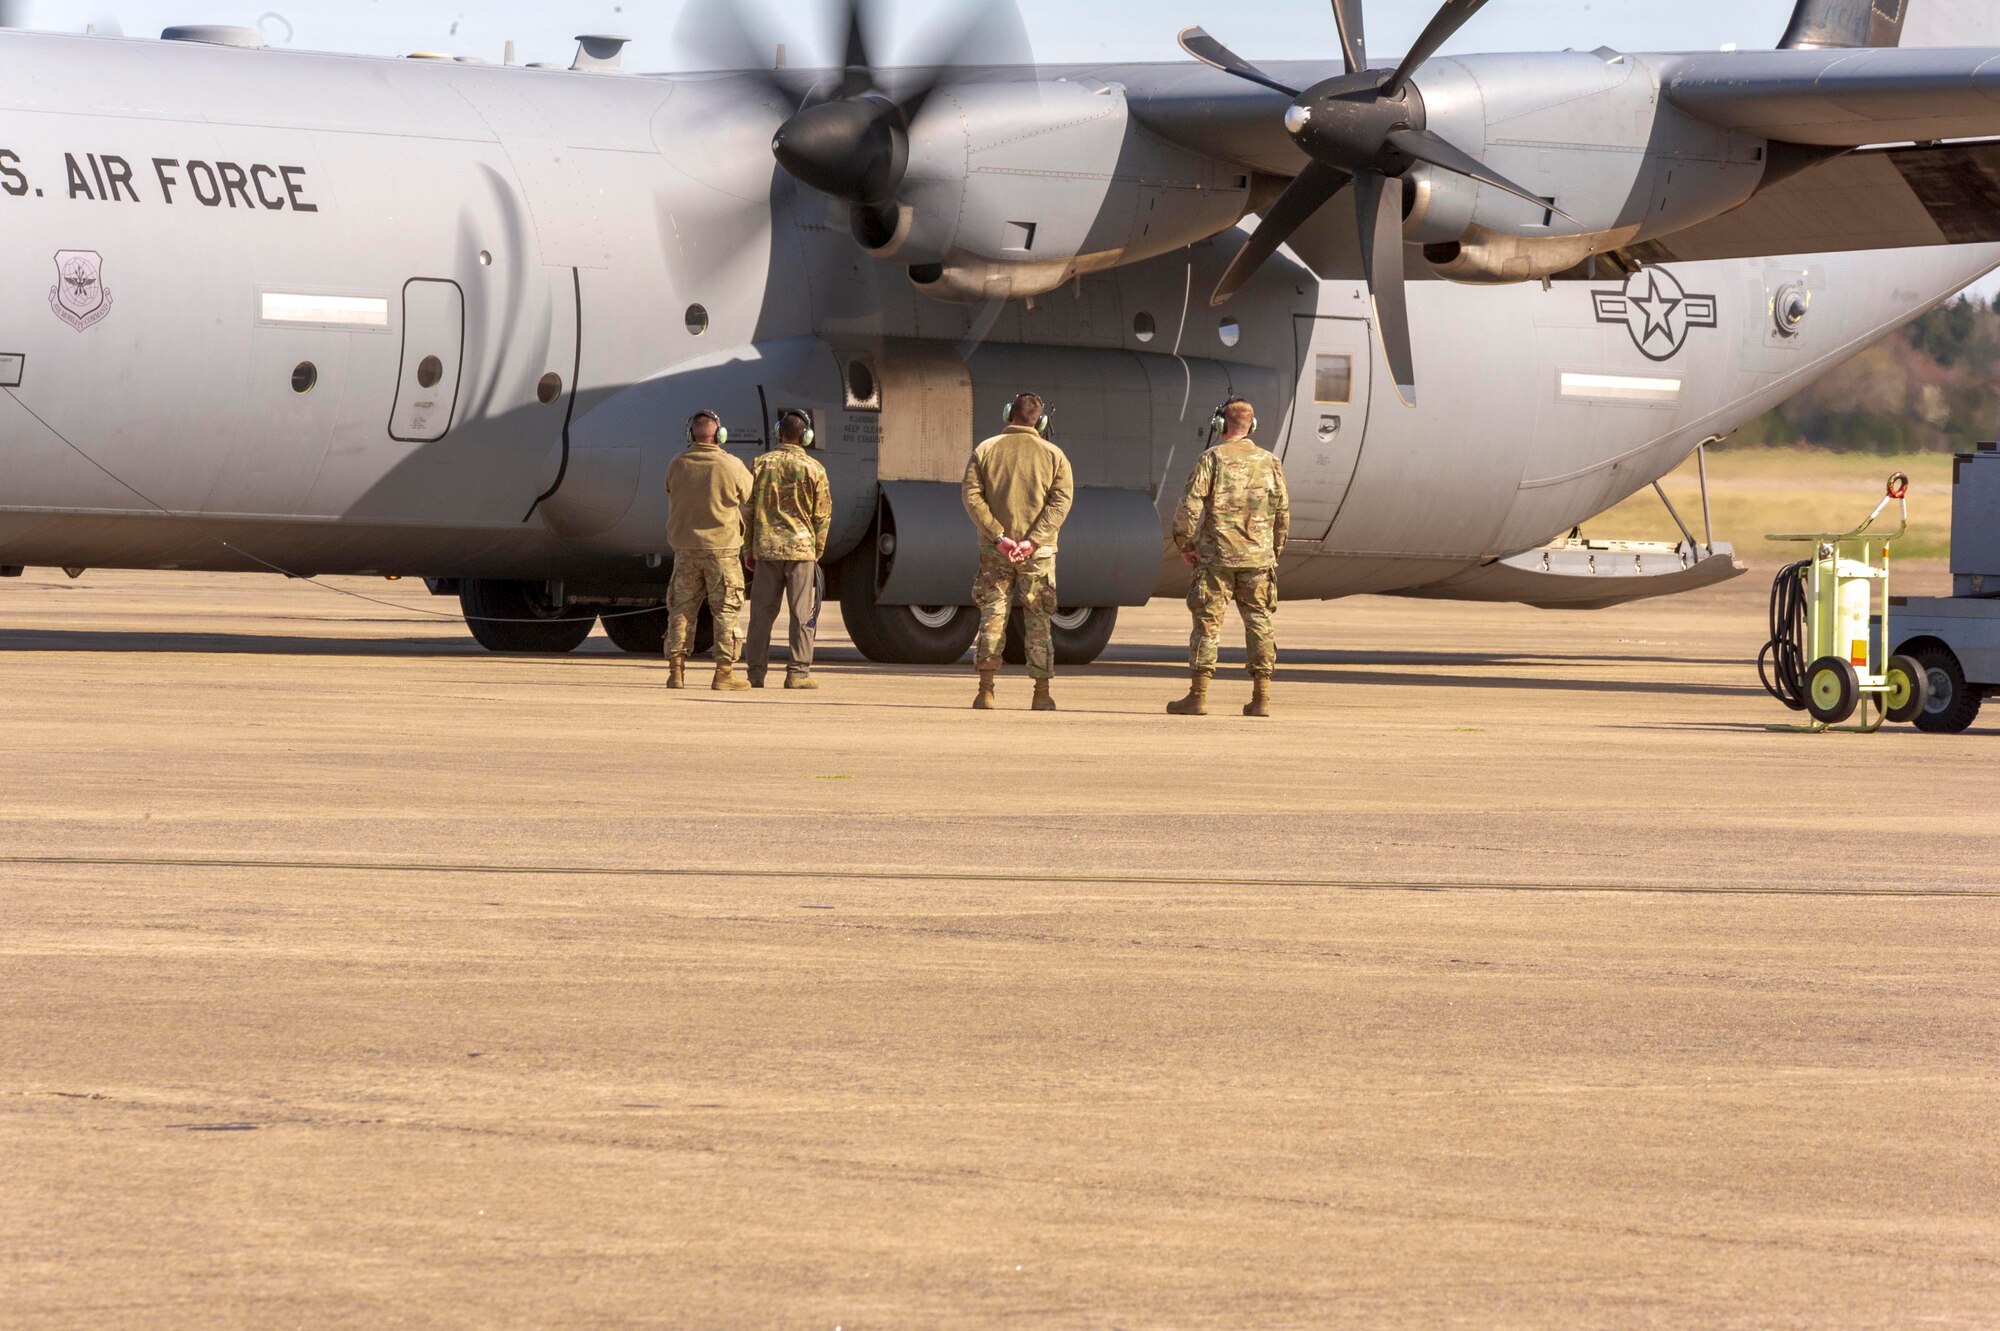 The C-130J Hercules starts engines to prepare to take off from Little Rock Air Force Base, Ark. March 7, 2020.